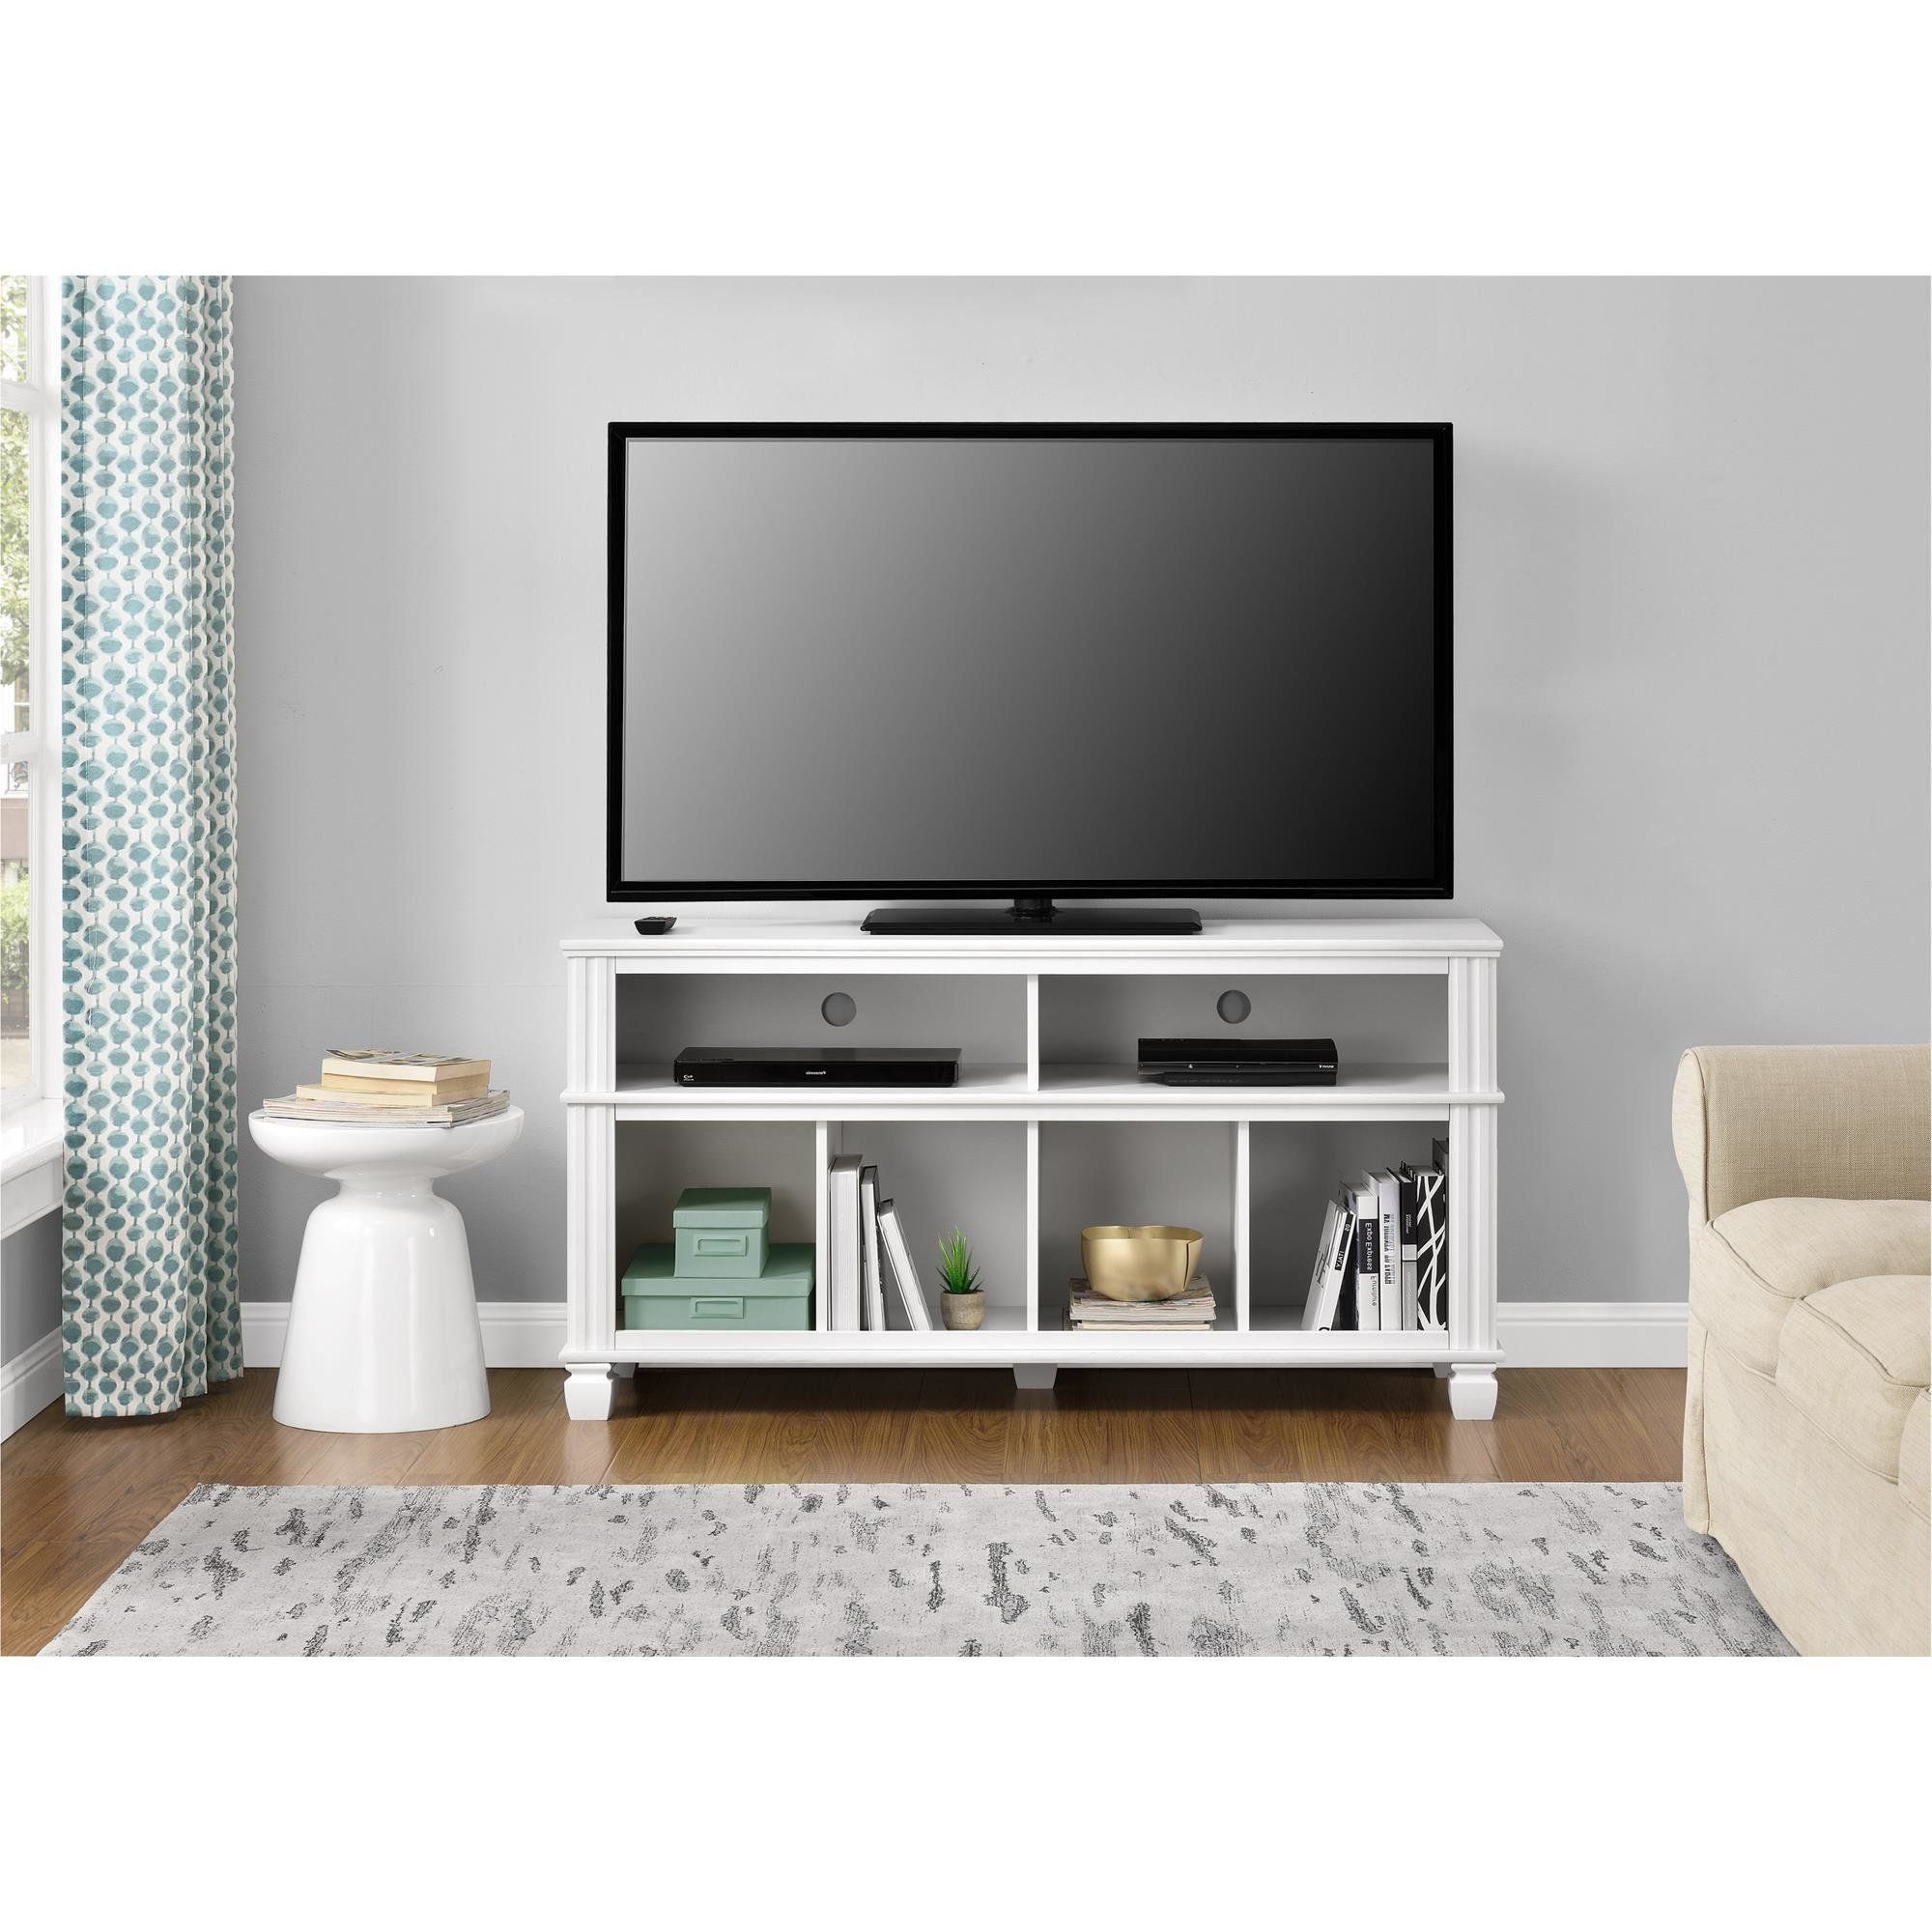 Bolden 53.5" Tv Stand | White Tv Stands, Living Room Intended For Bromley White Wide Tv Stands (Gallery 7 of 20)